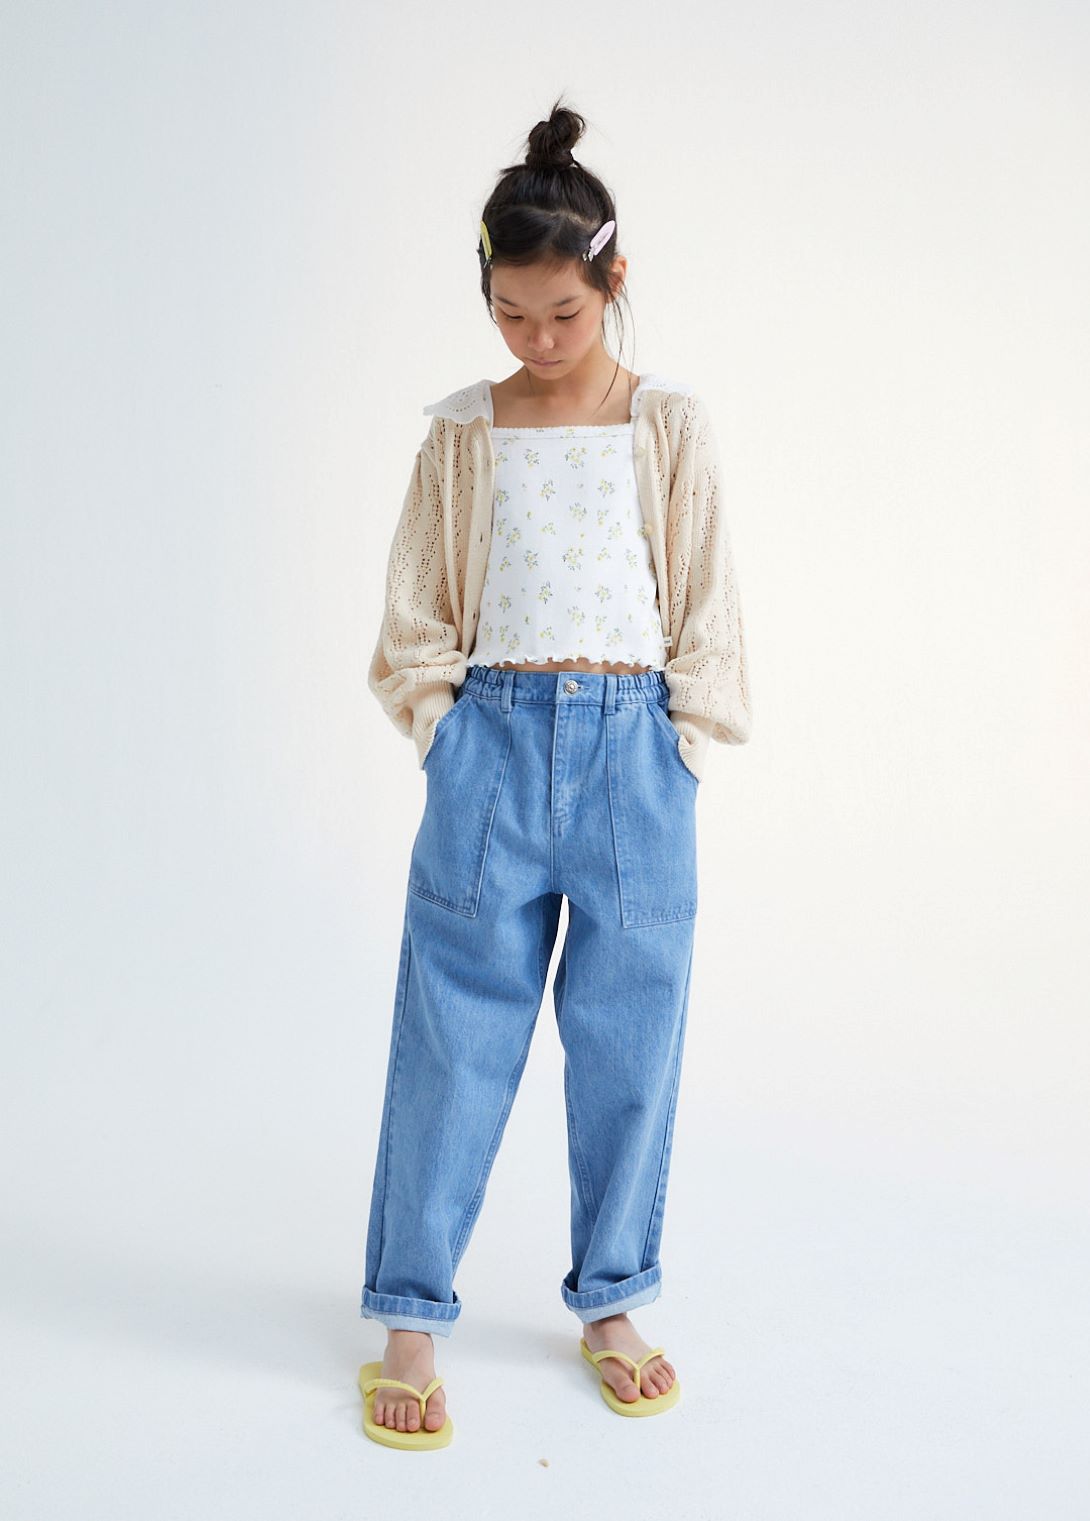 【the new society】【30%OFF】Rodney Cardigan Natural カーディガン 3y,4y,6y  | Coucoubebe/ククベベ